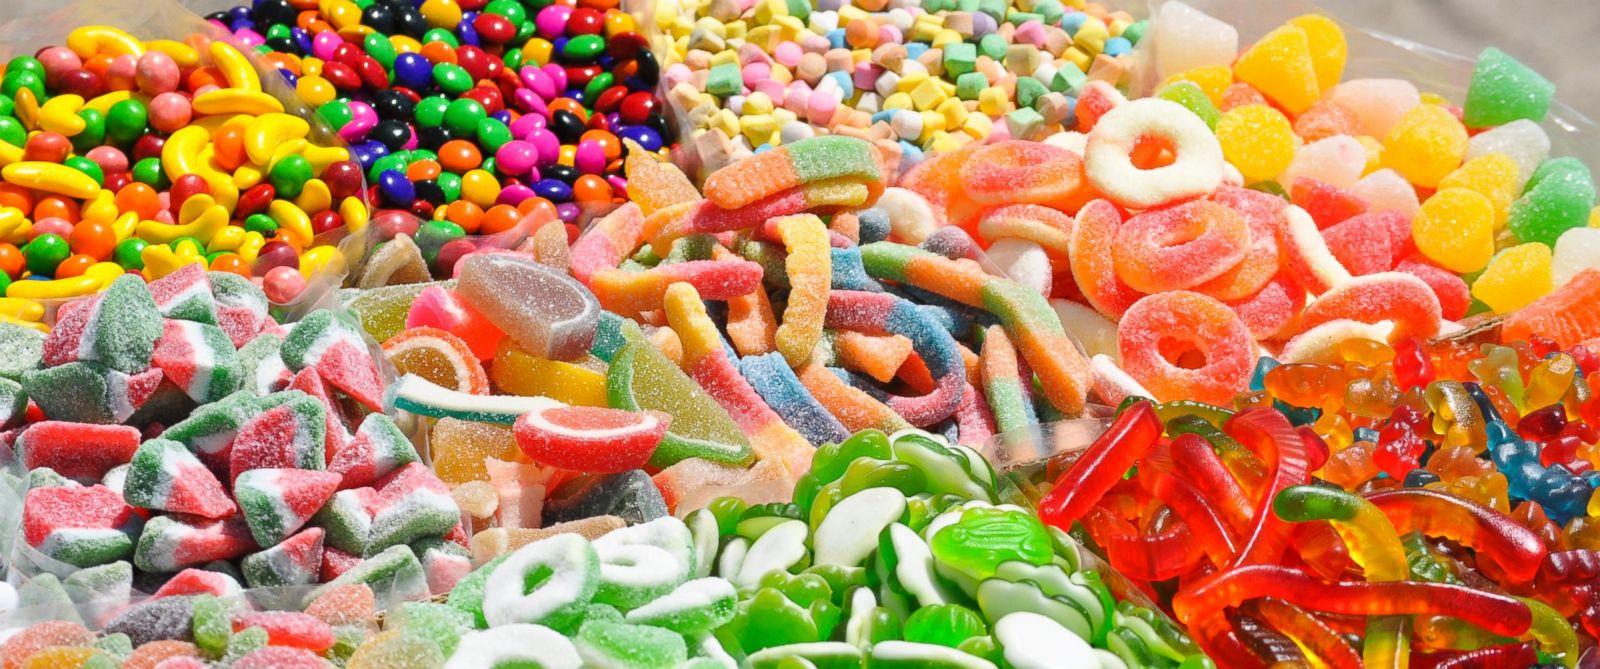 How to Fix Your Sugar Fix - ABC News